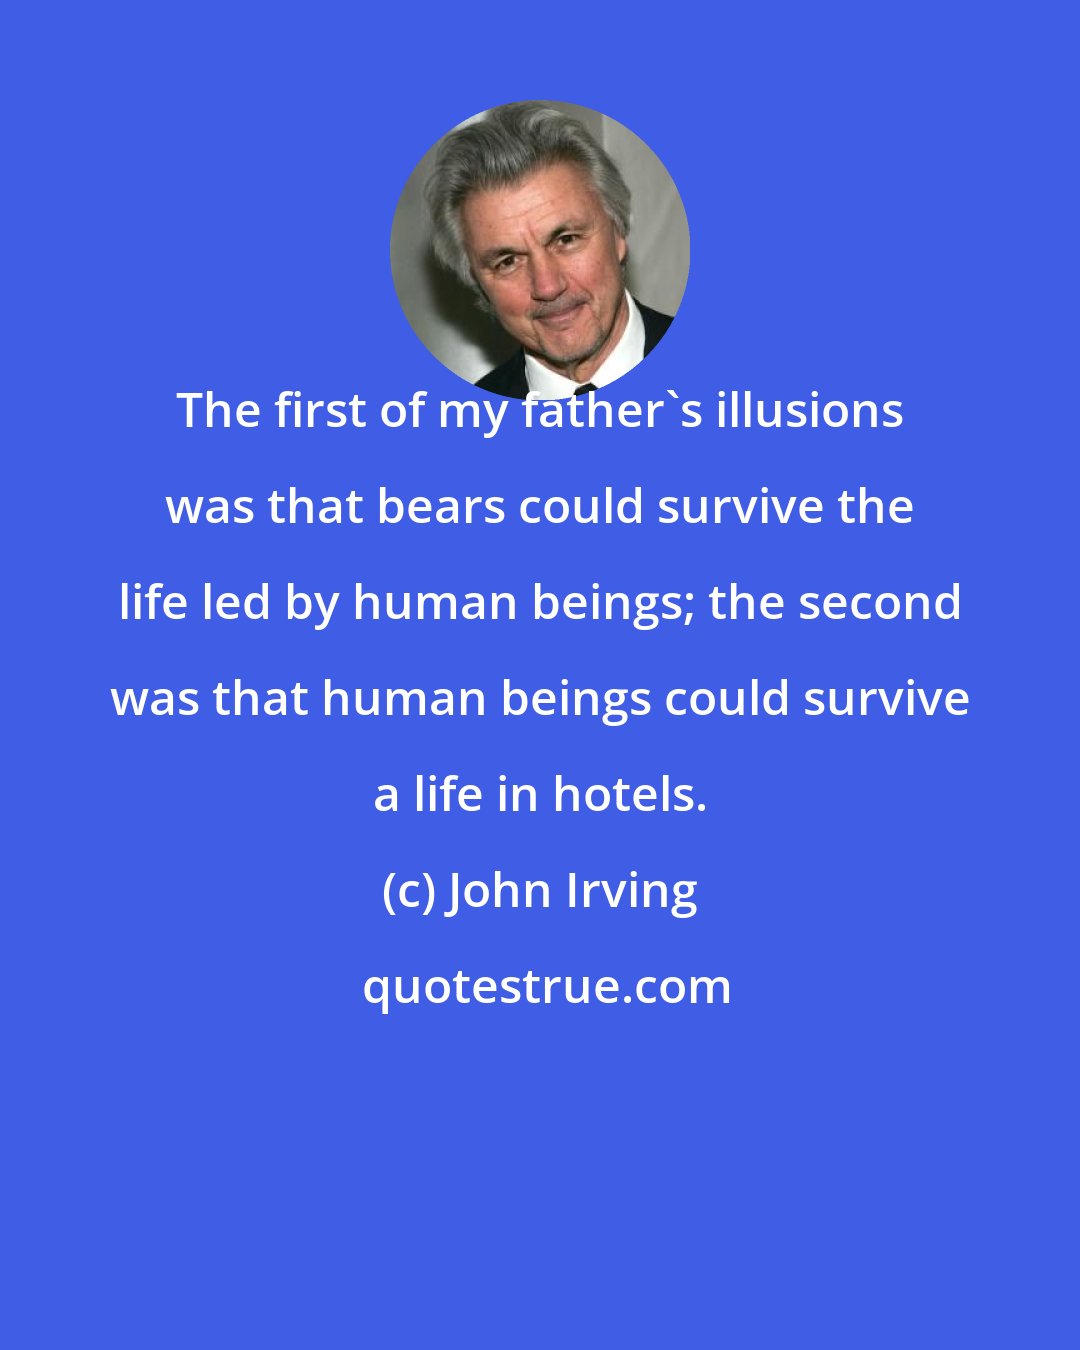 John Irving: The first of my father's illusions was that bears could survive the life led by human beings; the second was that human beings could survive a life in hotels.